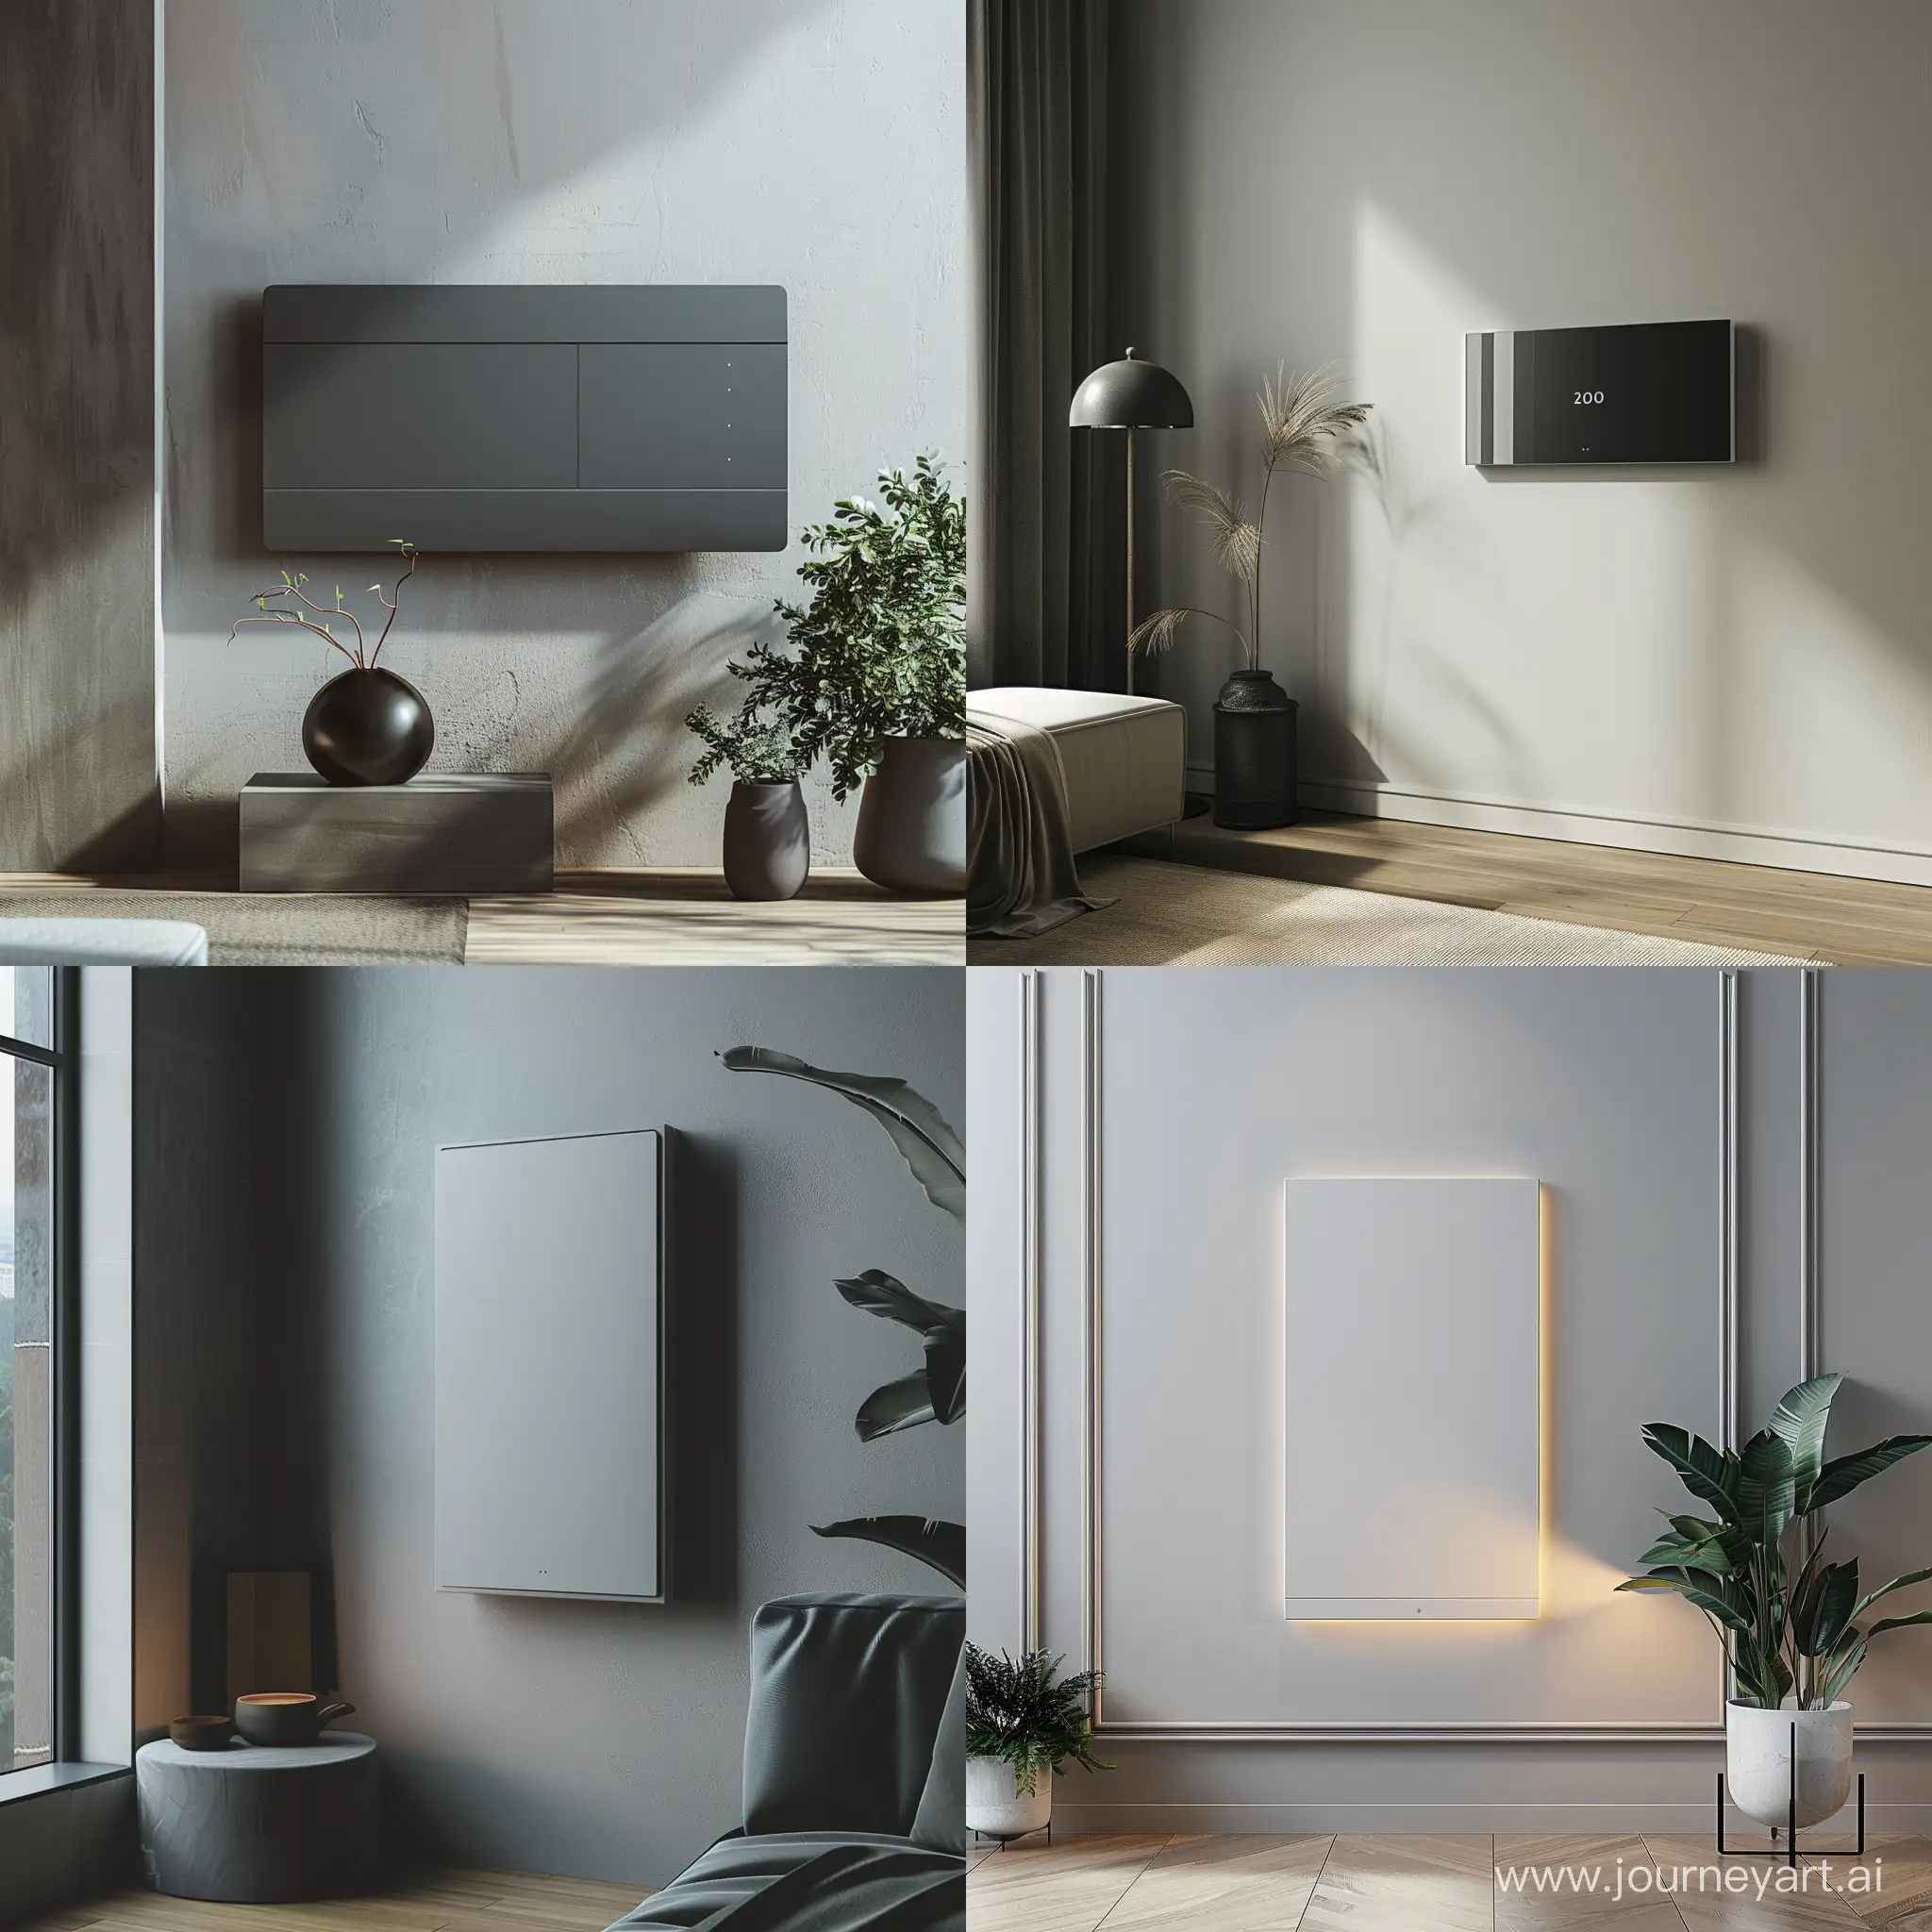 "Imagine a sleek, rectangular energy management panel that blends seamlessly into any room's decor. This flat, wall-mounted device is designed with a durable composite material that can be painted over or covered with wallpaper to match the interior perfectly. It features discreet, touch-sensitive areas for intuitive control, maintaining a smooth surface that is indistinguishable from the rest of the wall. The panel measures 30 cm by 20 cm, with a slim profile of 1 cm, embodying minimalist elegance and advanced functionality in smart homes."photorealistic product design style